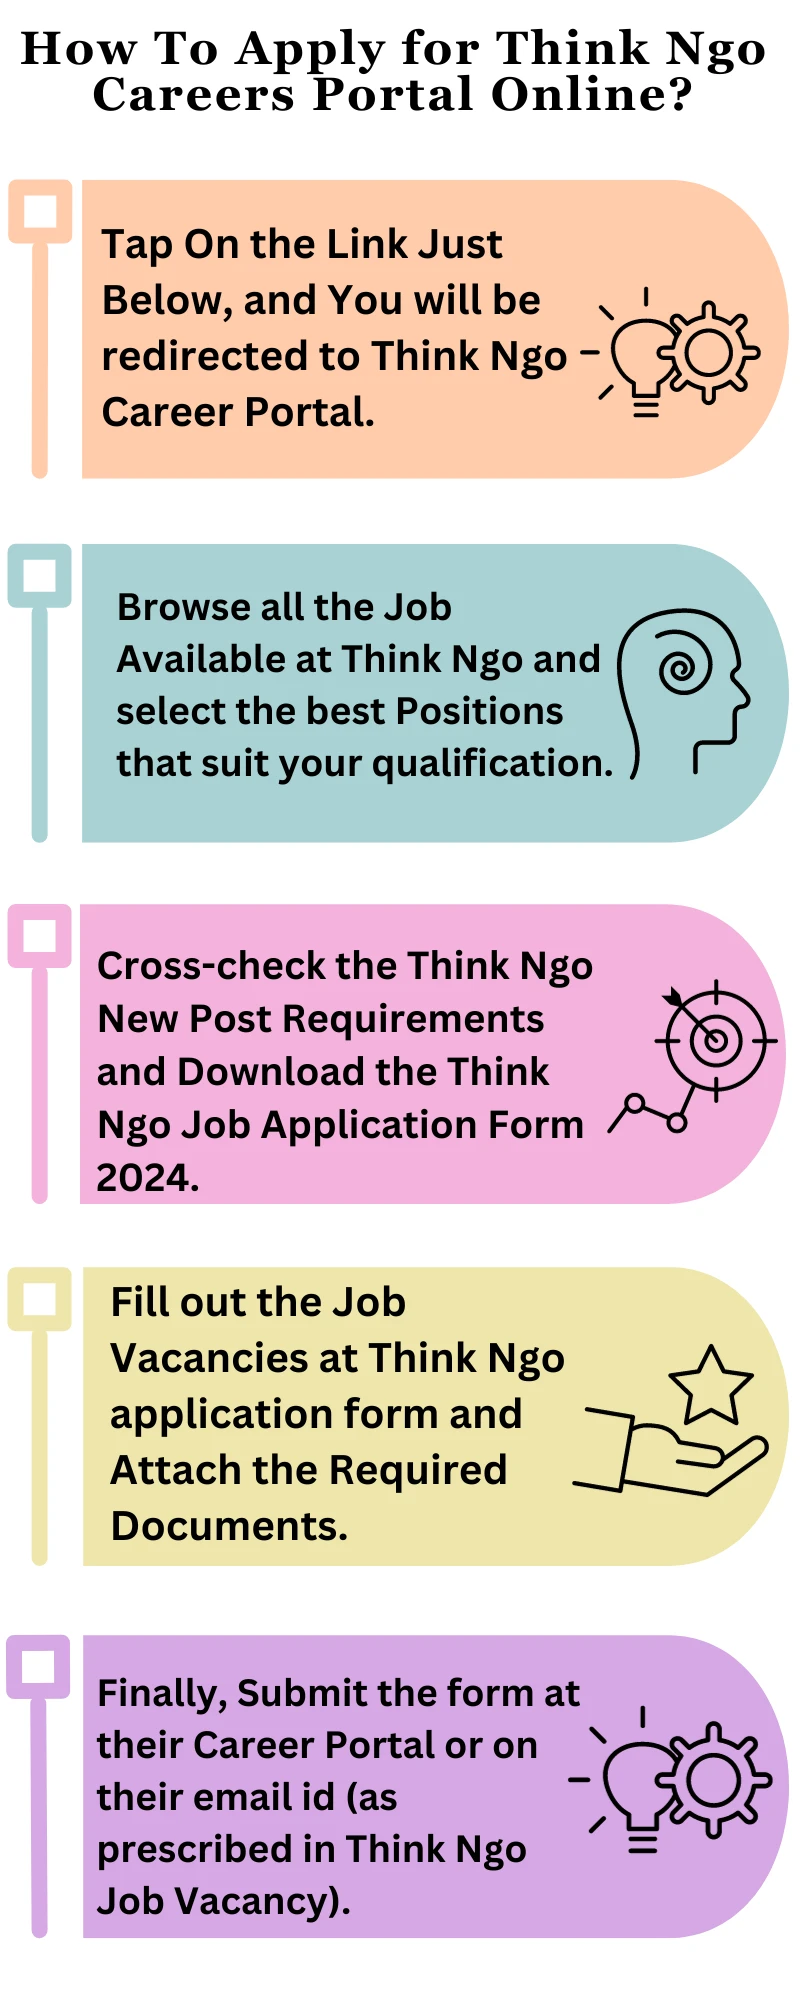 How To Apply for Think Ngo Careers Portal Online?